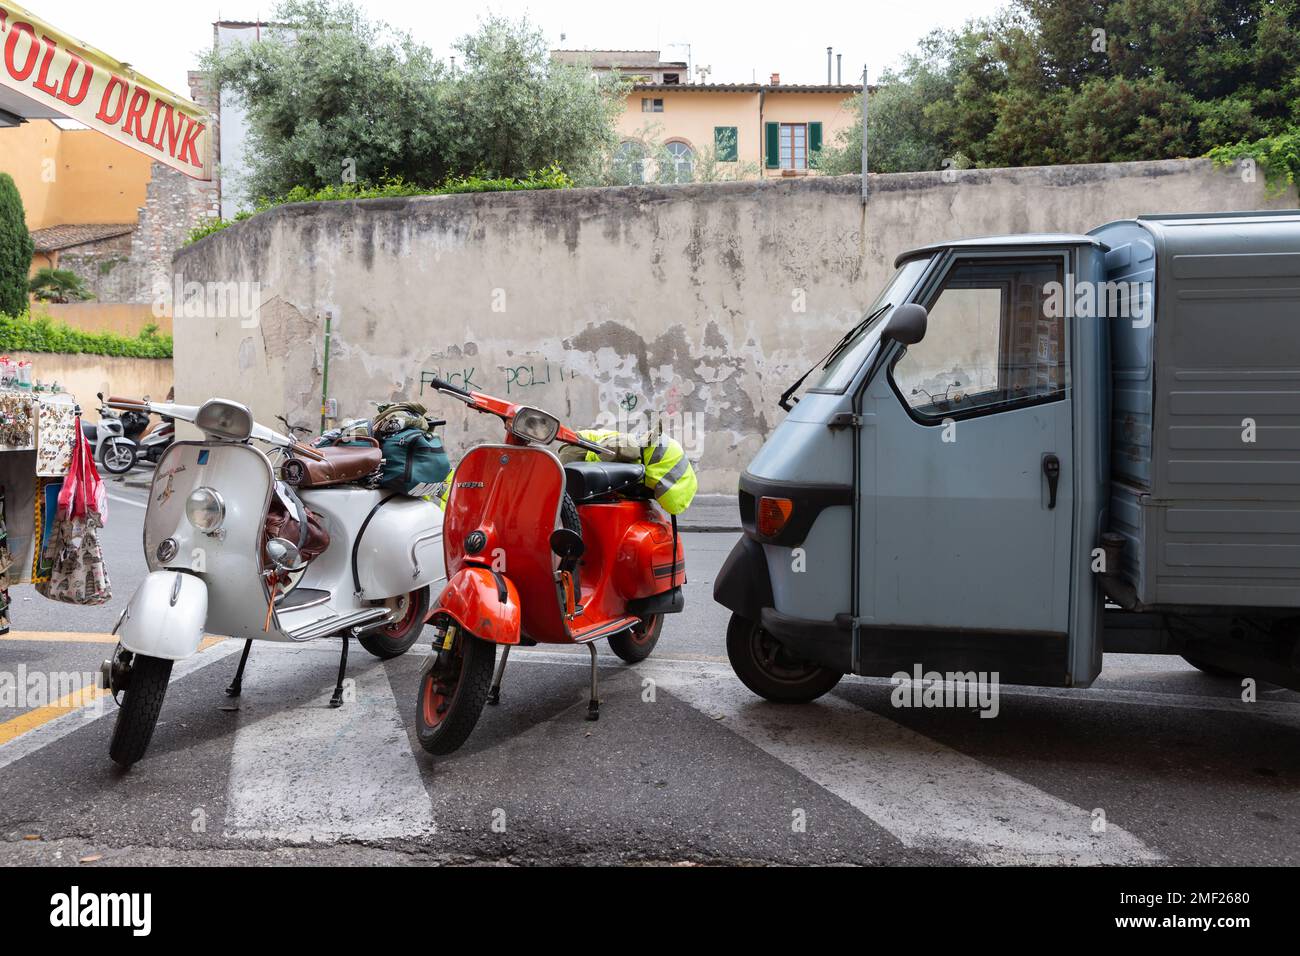 Two vintage vespas parked in front of Ape Italian pickup truck, Pisa, Tuscany, Italy. Stock Photo